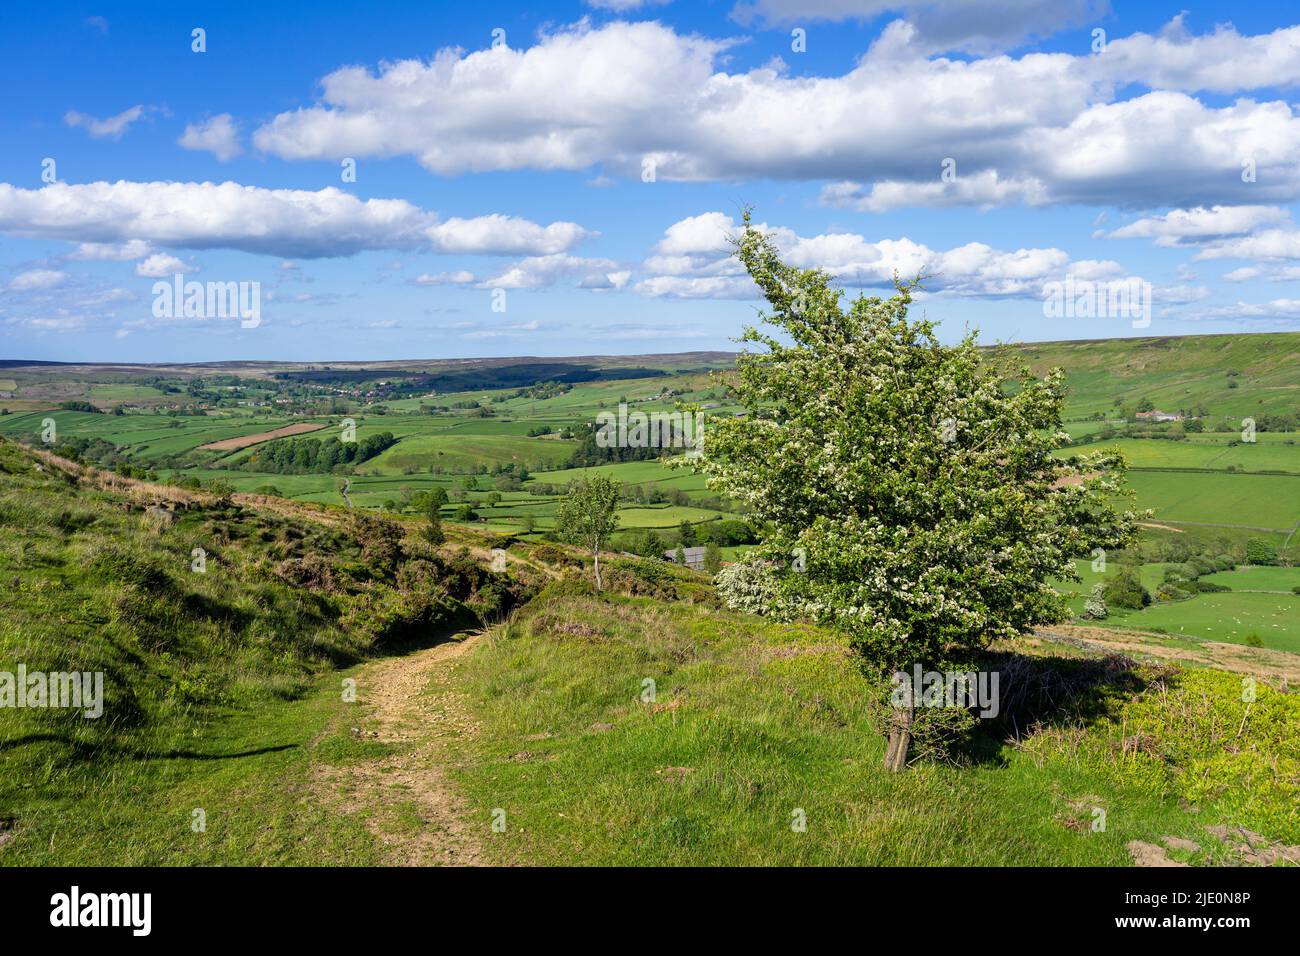 North York Moors and view of green fields farmland and moors from Blakey Ridge North York Moors national park North Yorkshire England UK GB Europe Stock Photo